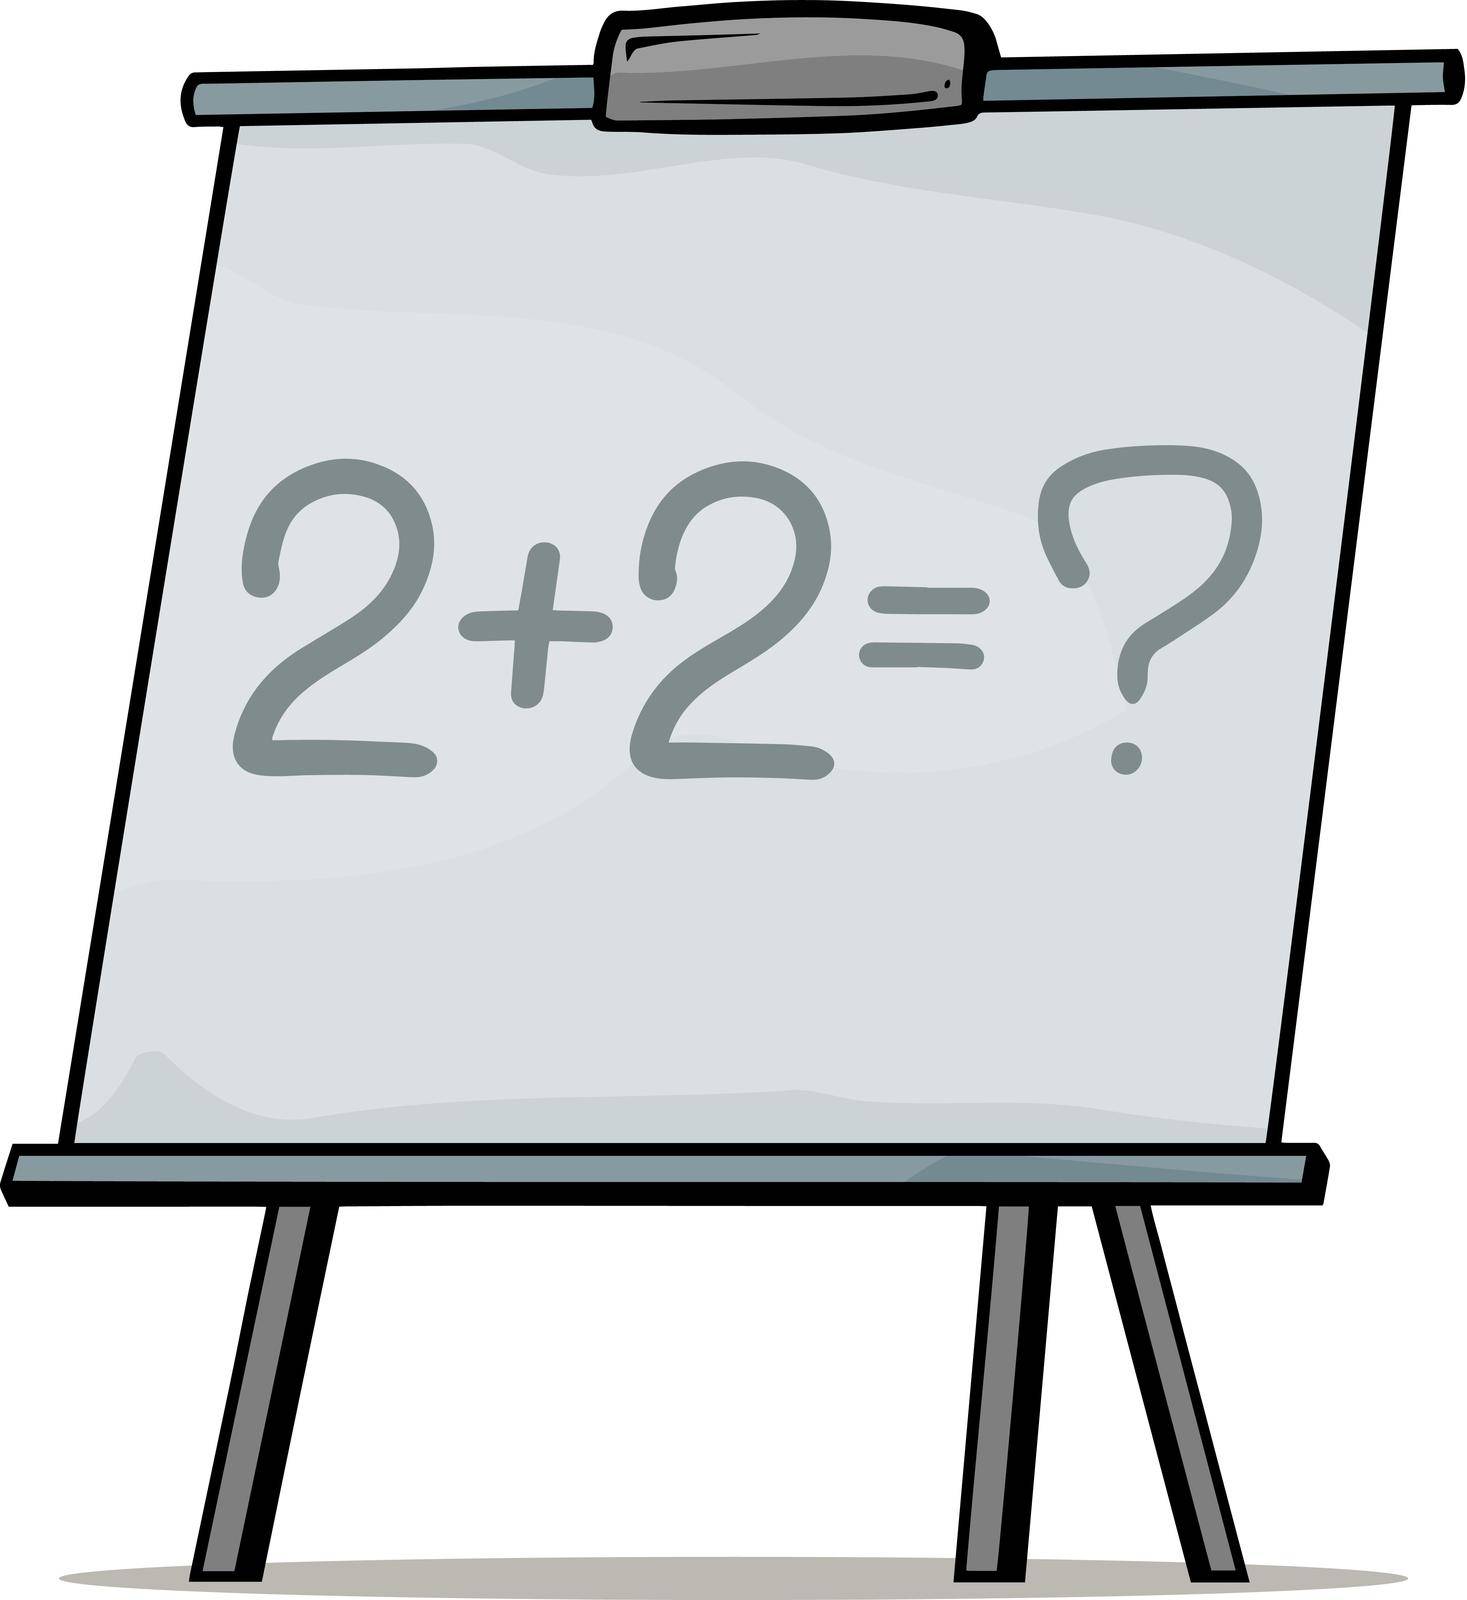 Cartoon school whiteboard for mathematic with two plus two numbers and question mark. Vector icon.